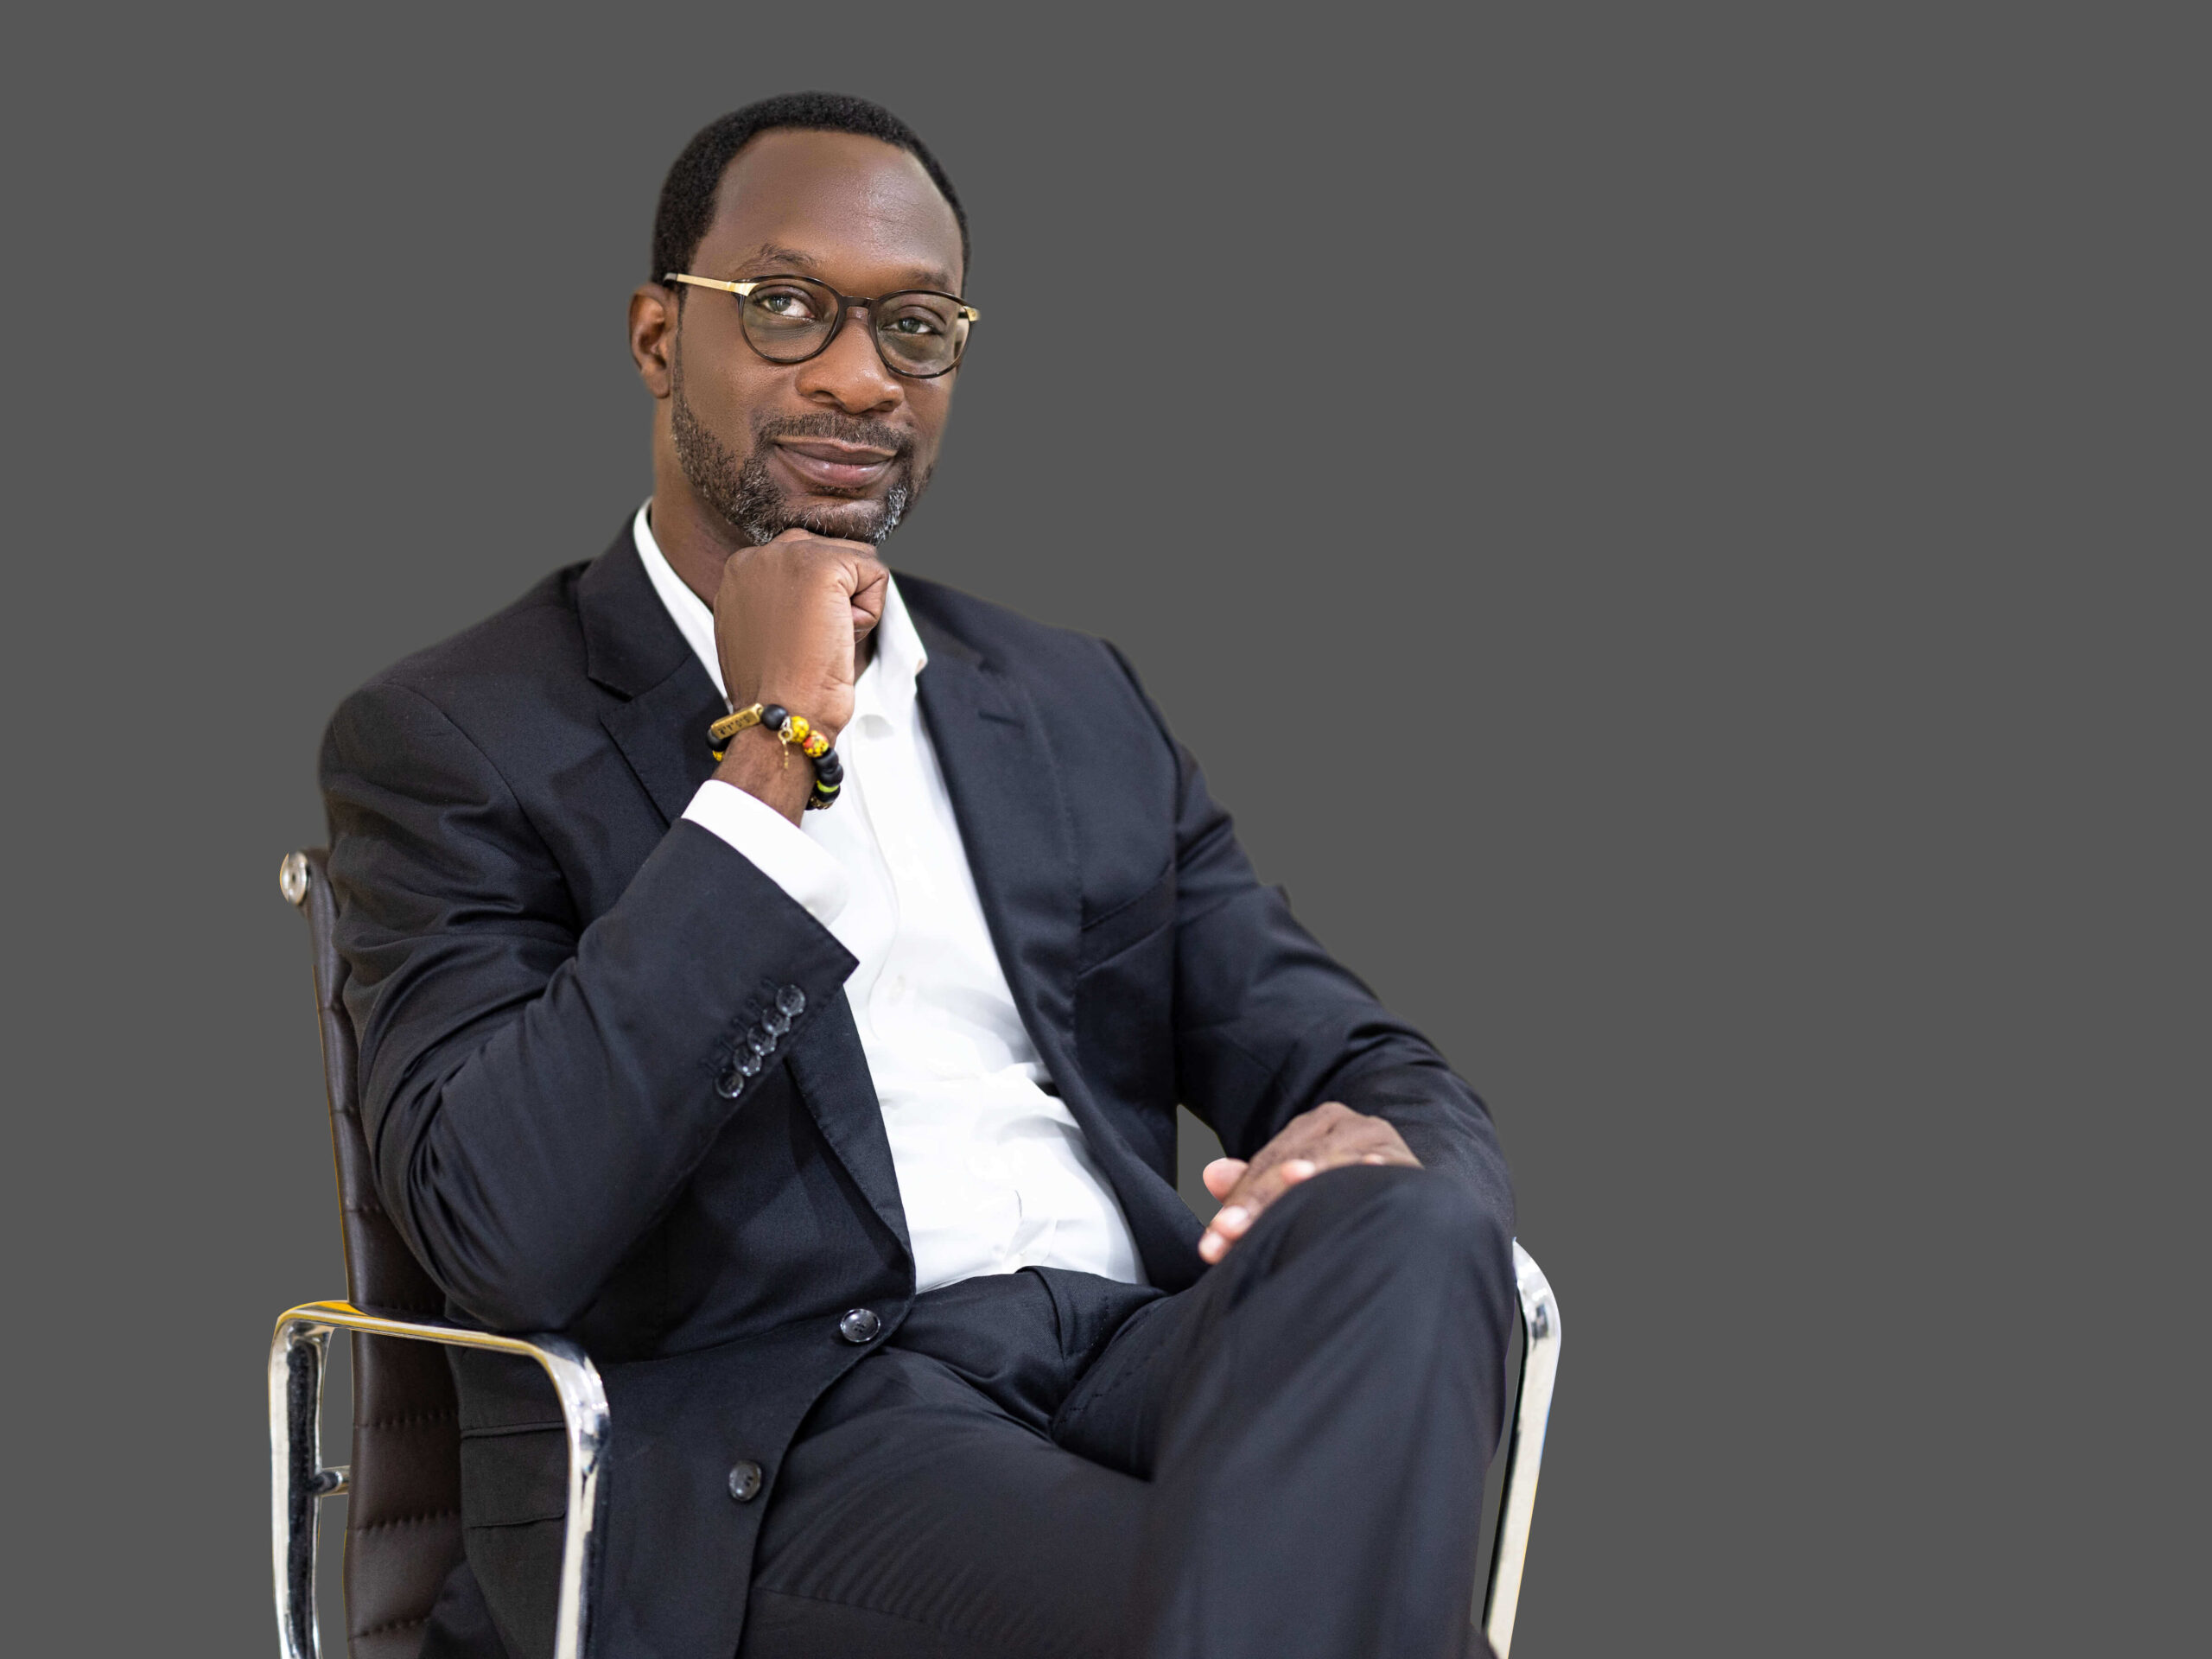 MTN Ghana’s Selorm Adadevoh is now the Chief Commercial Officer for the MTN Group